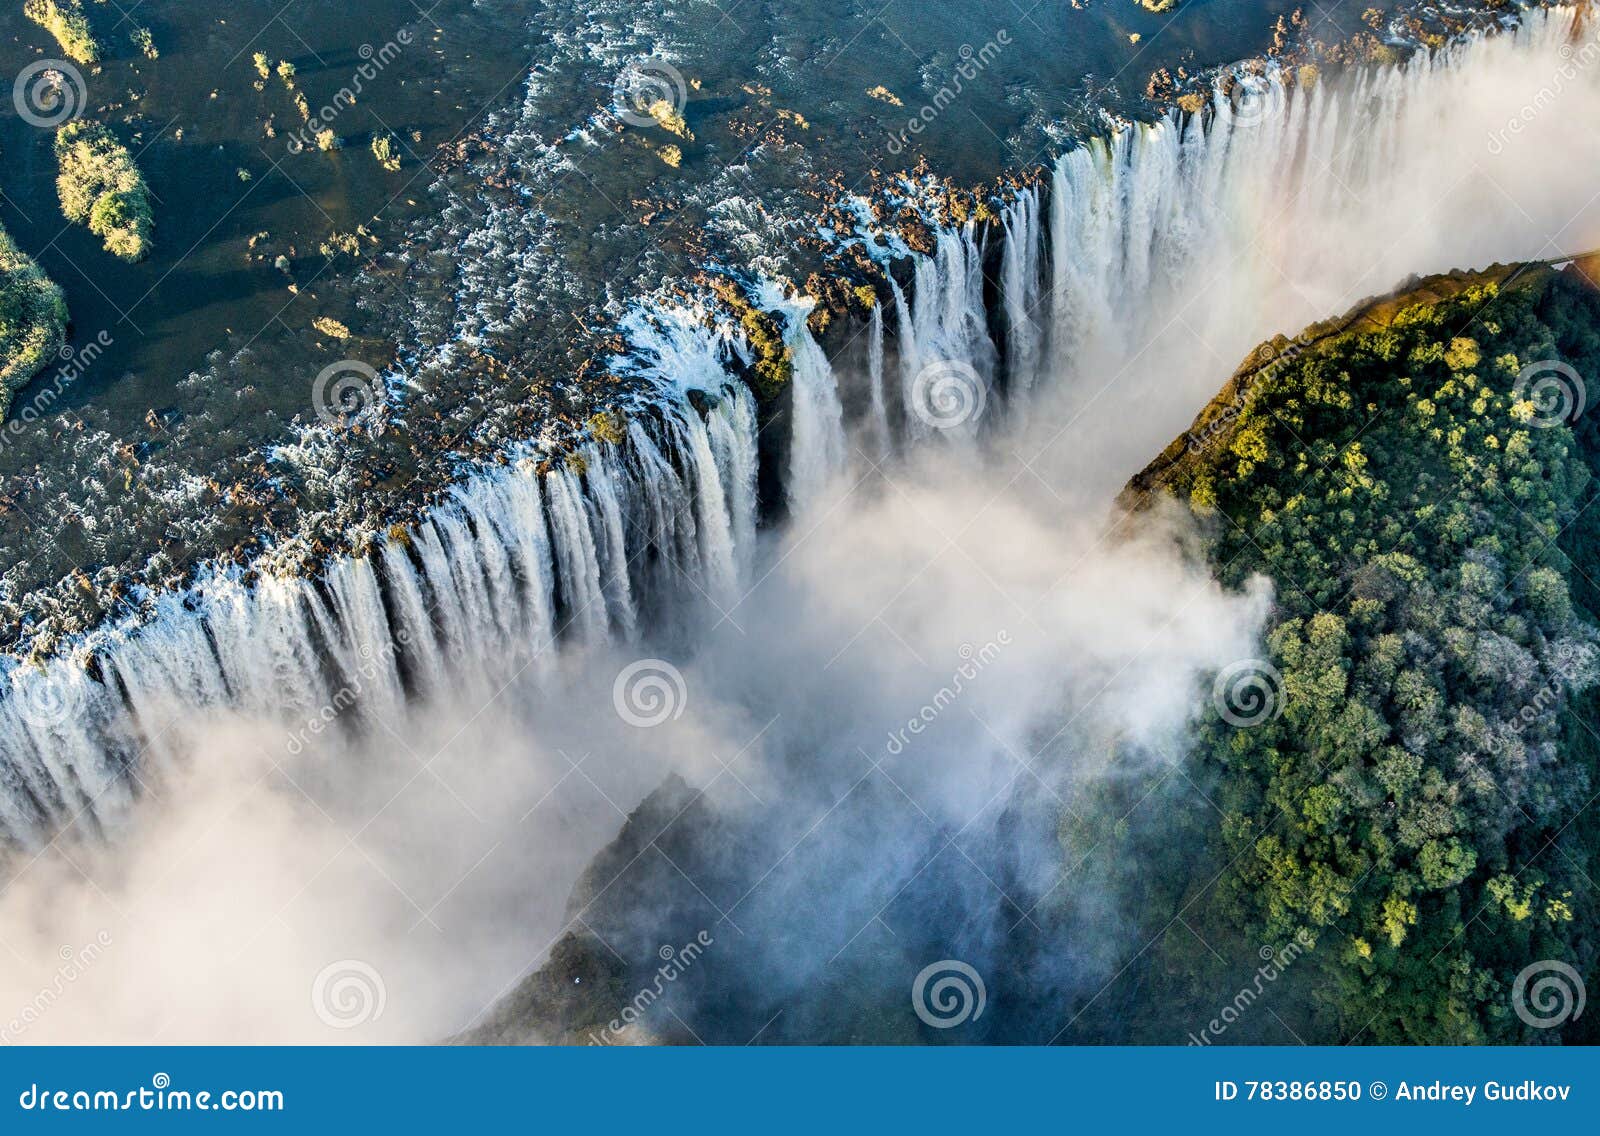 view of the falls from a height of bird flight. victoria falls. mosi-oa-tunya national park.zambiya. and world heritage site.